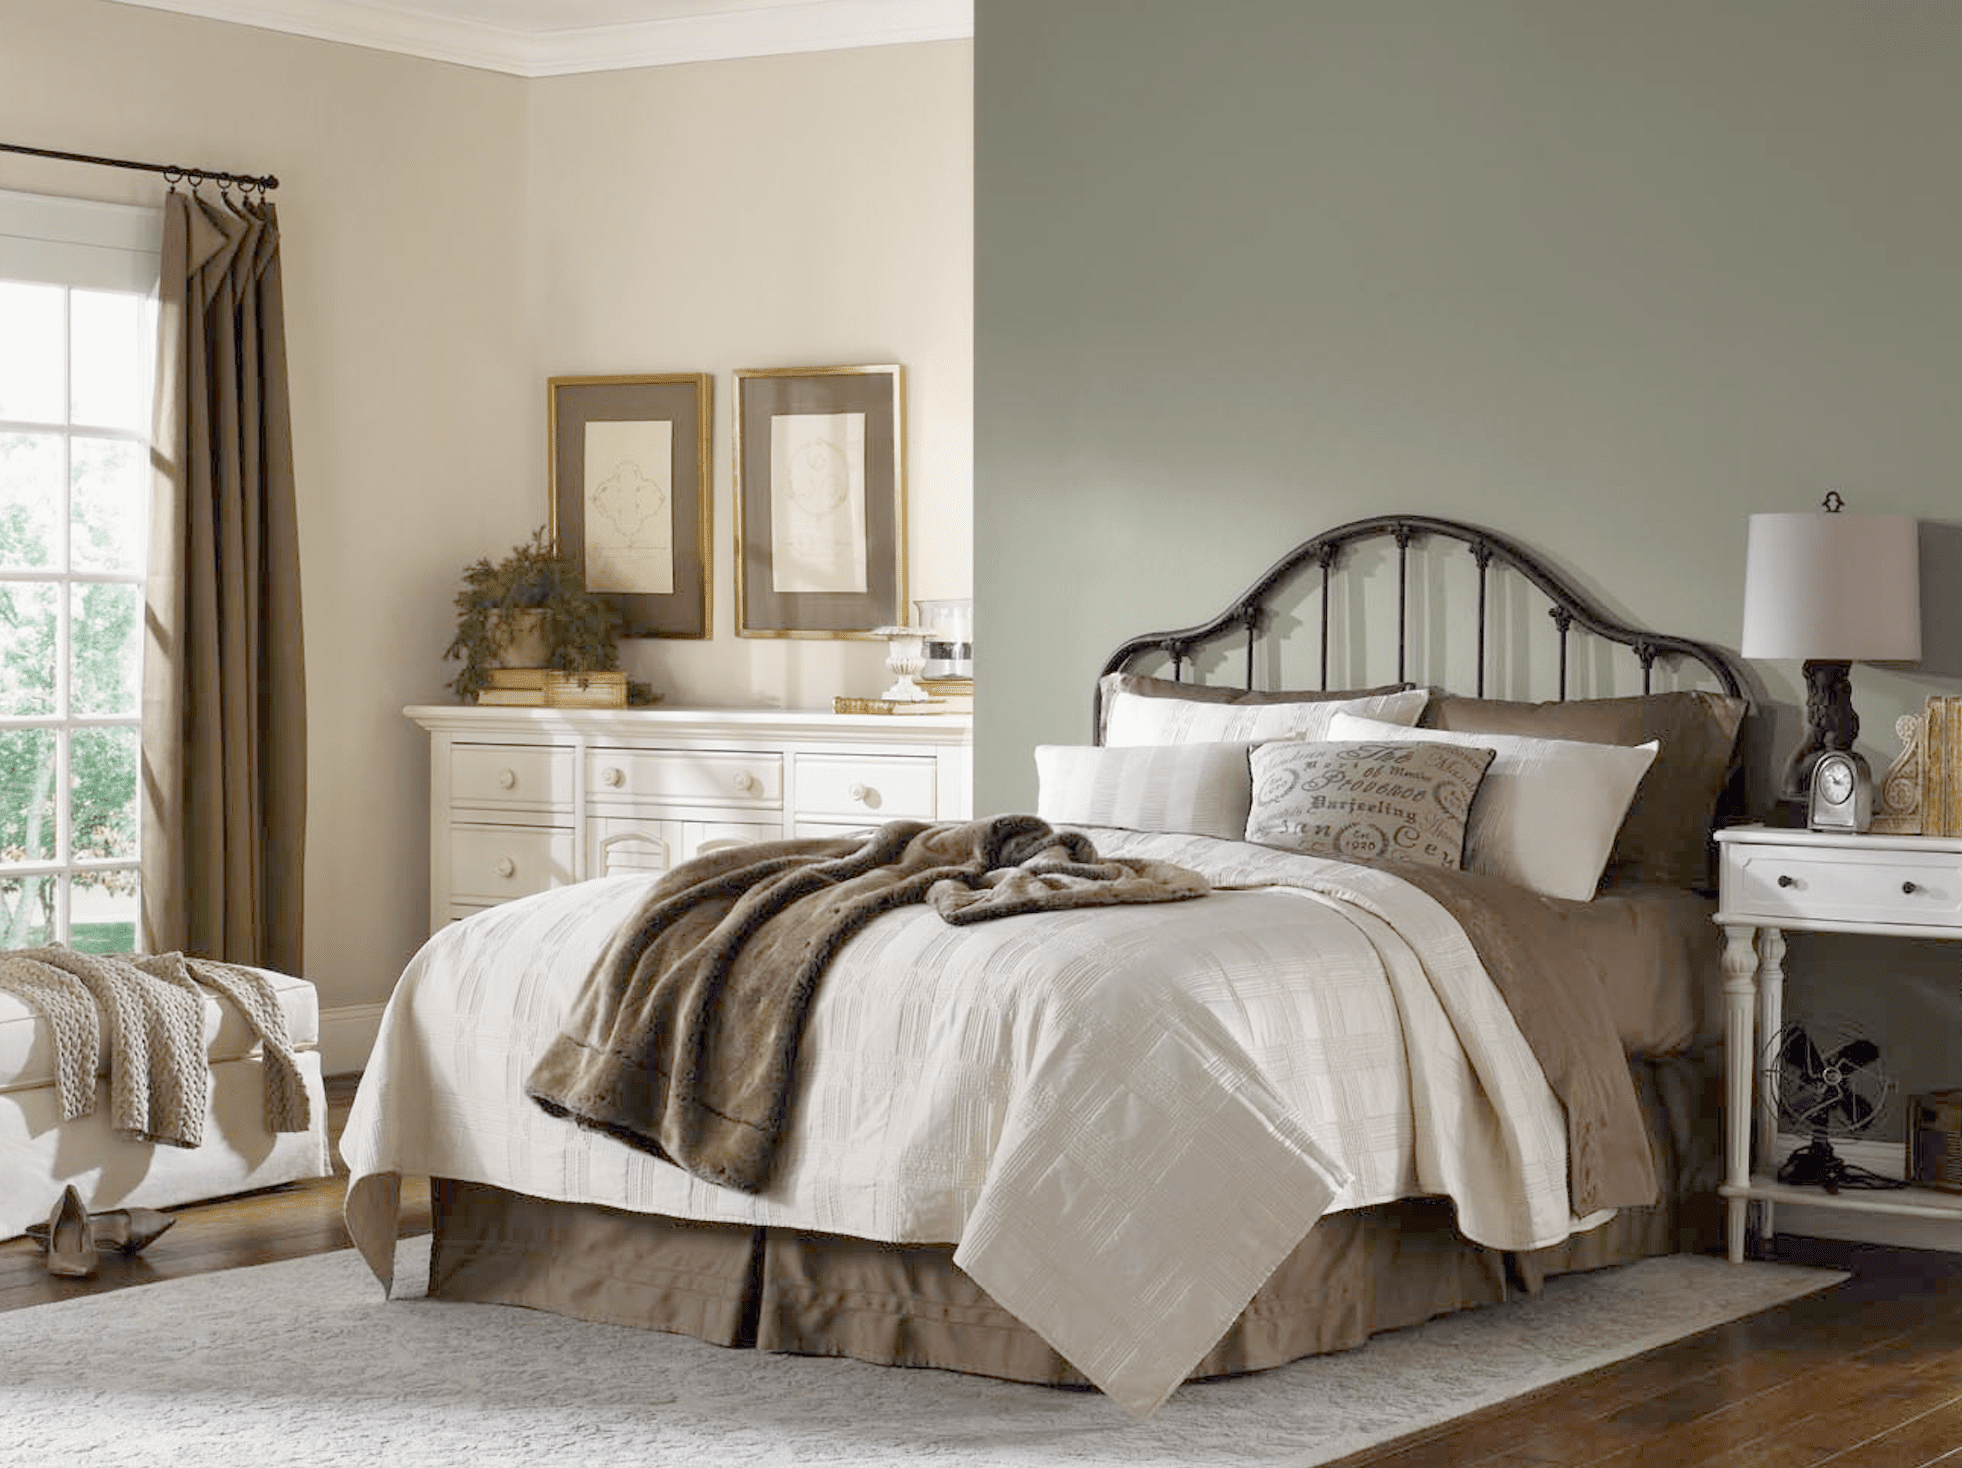 8 Relaxing Sherwin Williams Paint Colors For Bedrooms with sizing 1962 X 1468